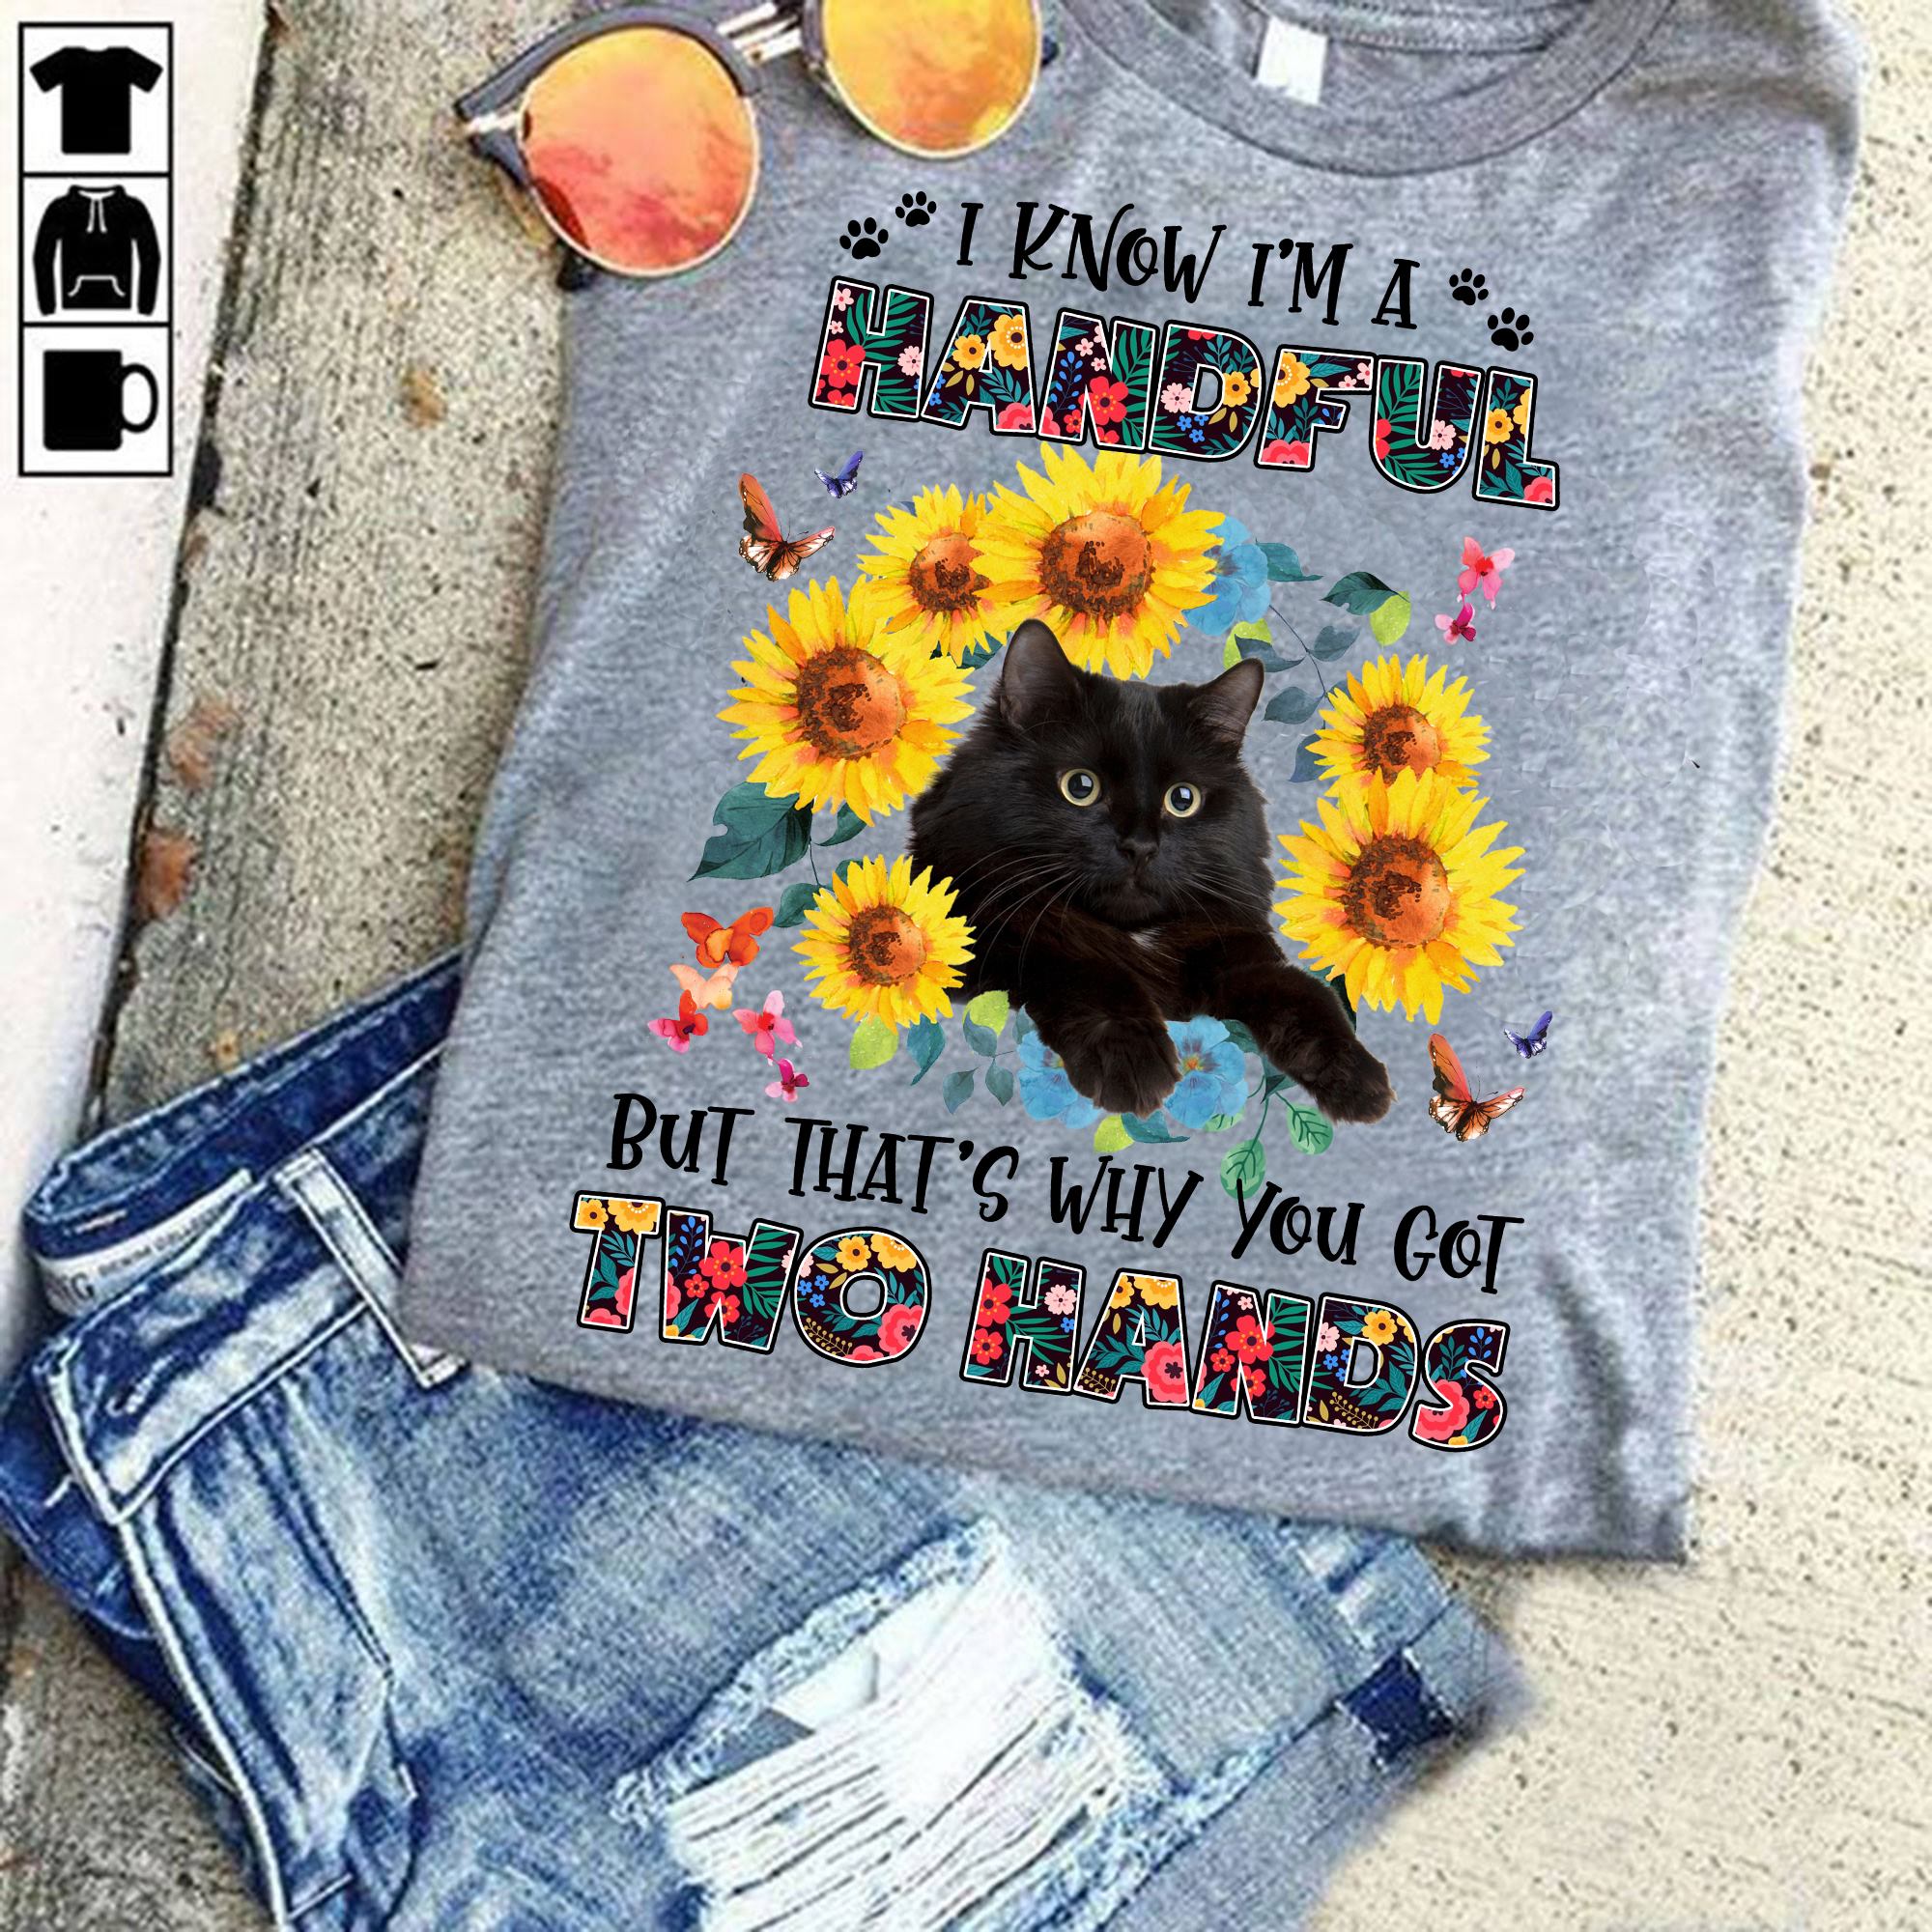 I know I'm a handful but that's why you got two hands - Sunflower black cat